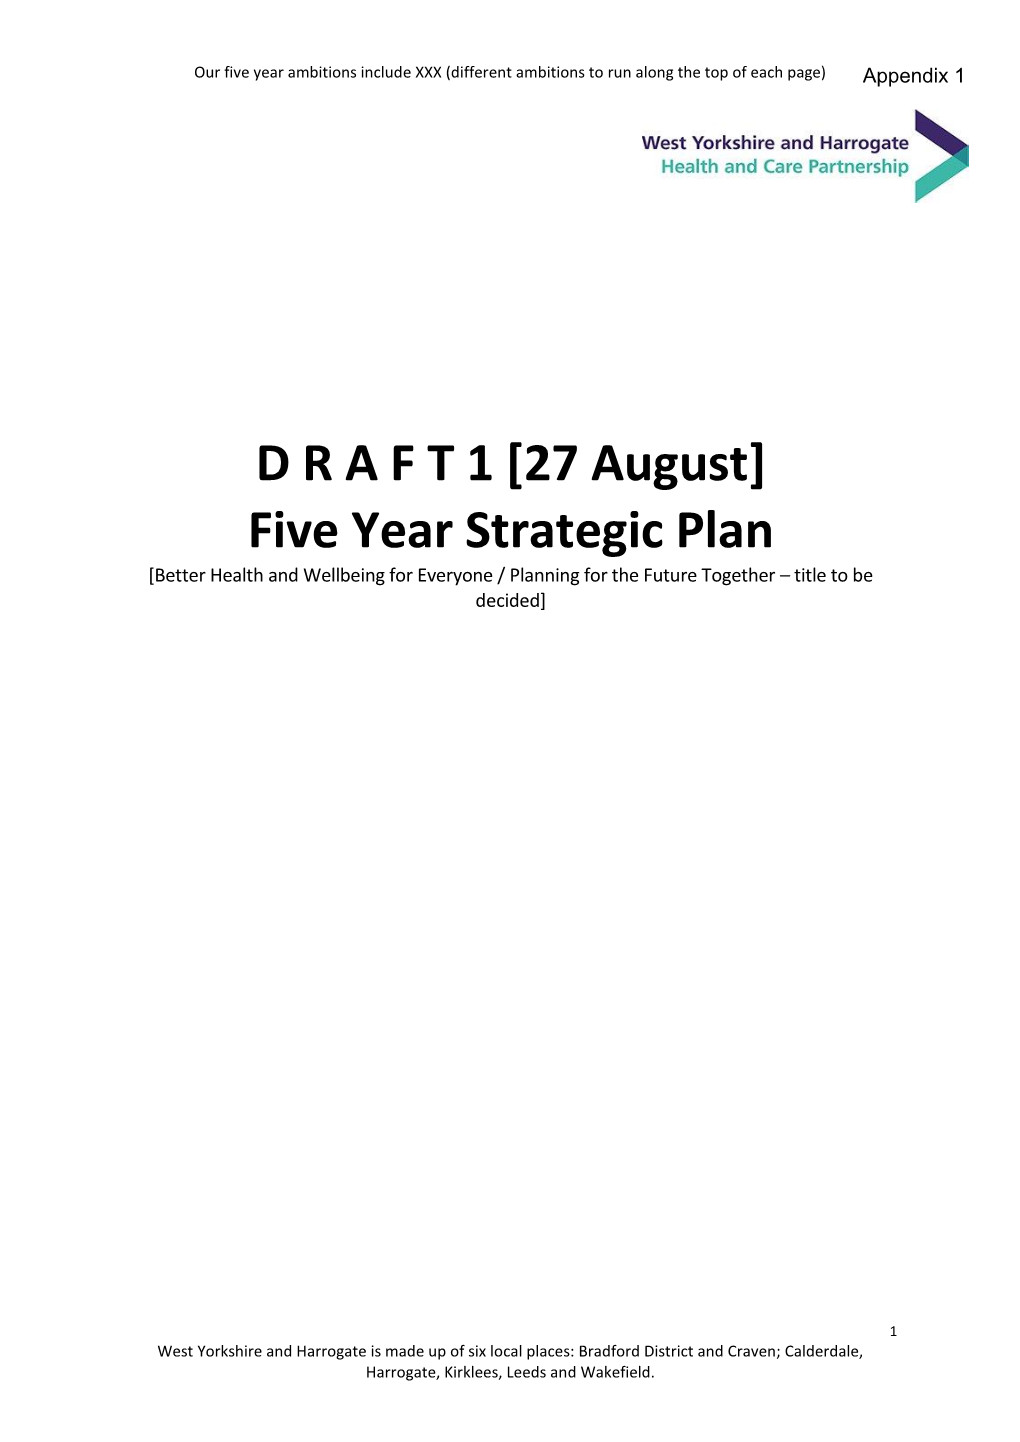 D R a F T 1 [27 August] Five Year Strategic Plan [Better Health and Wellbeing for Everyone / Planning for the Future Together – Title to Be Decided]